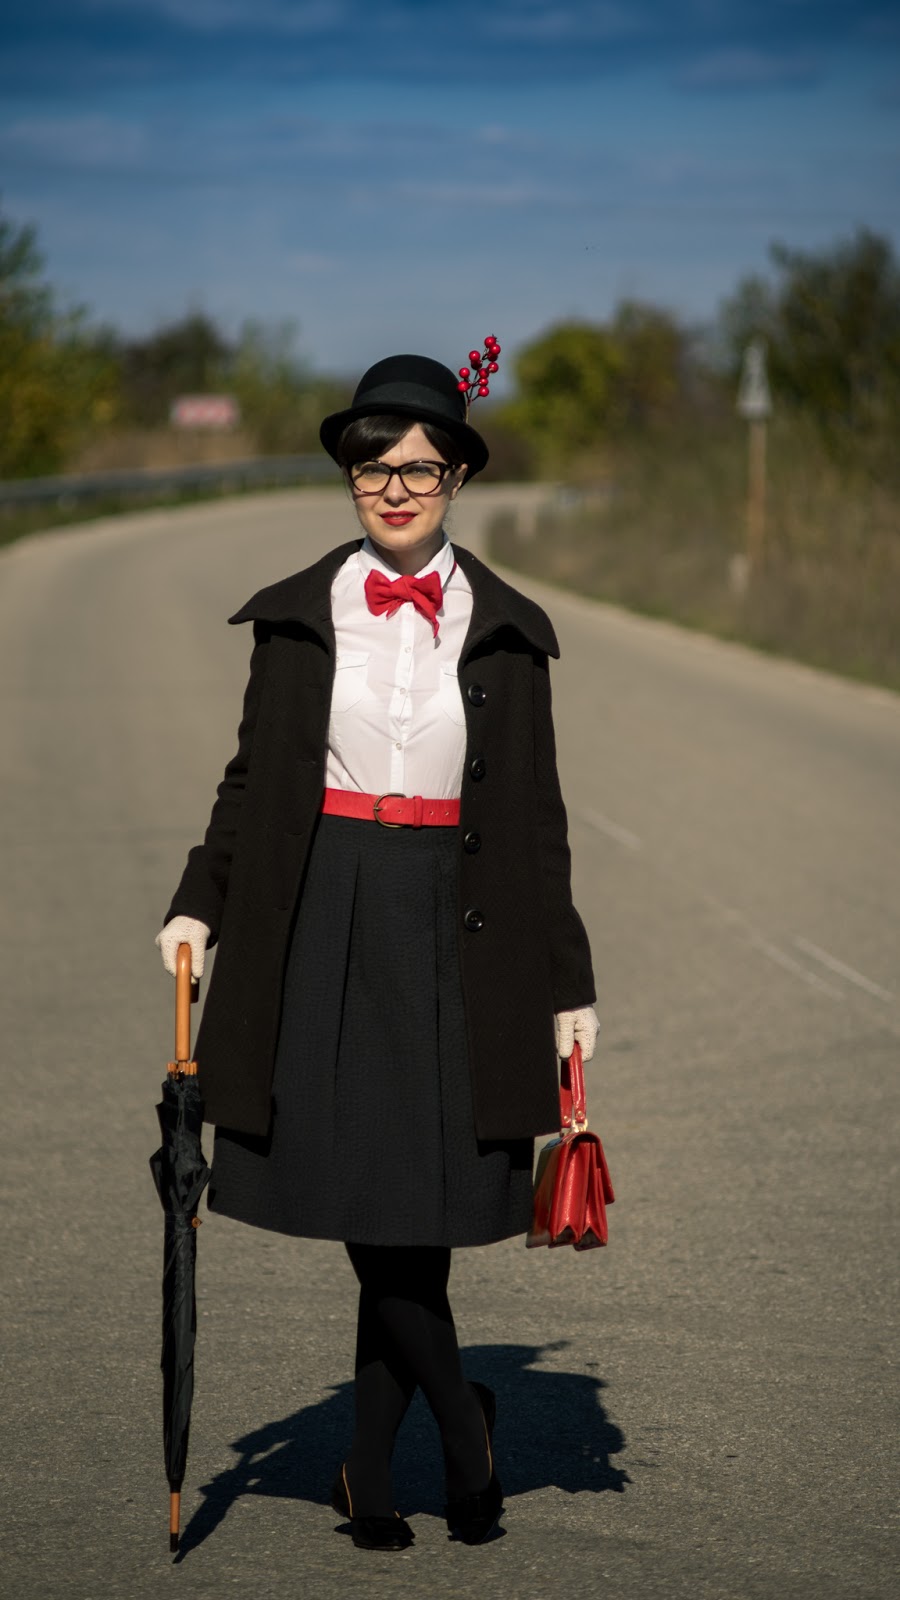 Miss Green has a new home: Easy DIY Halloween Costume - Mary Poppins